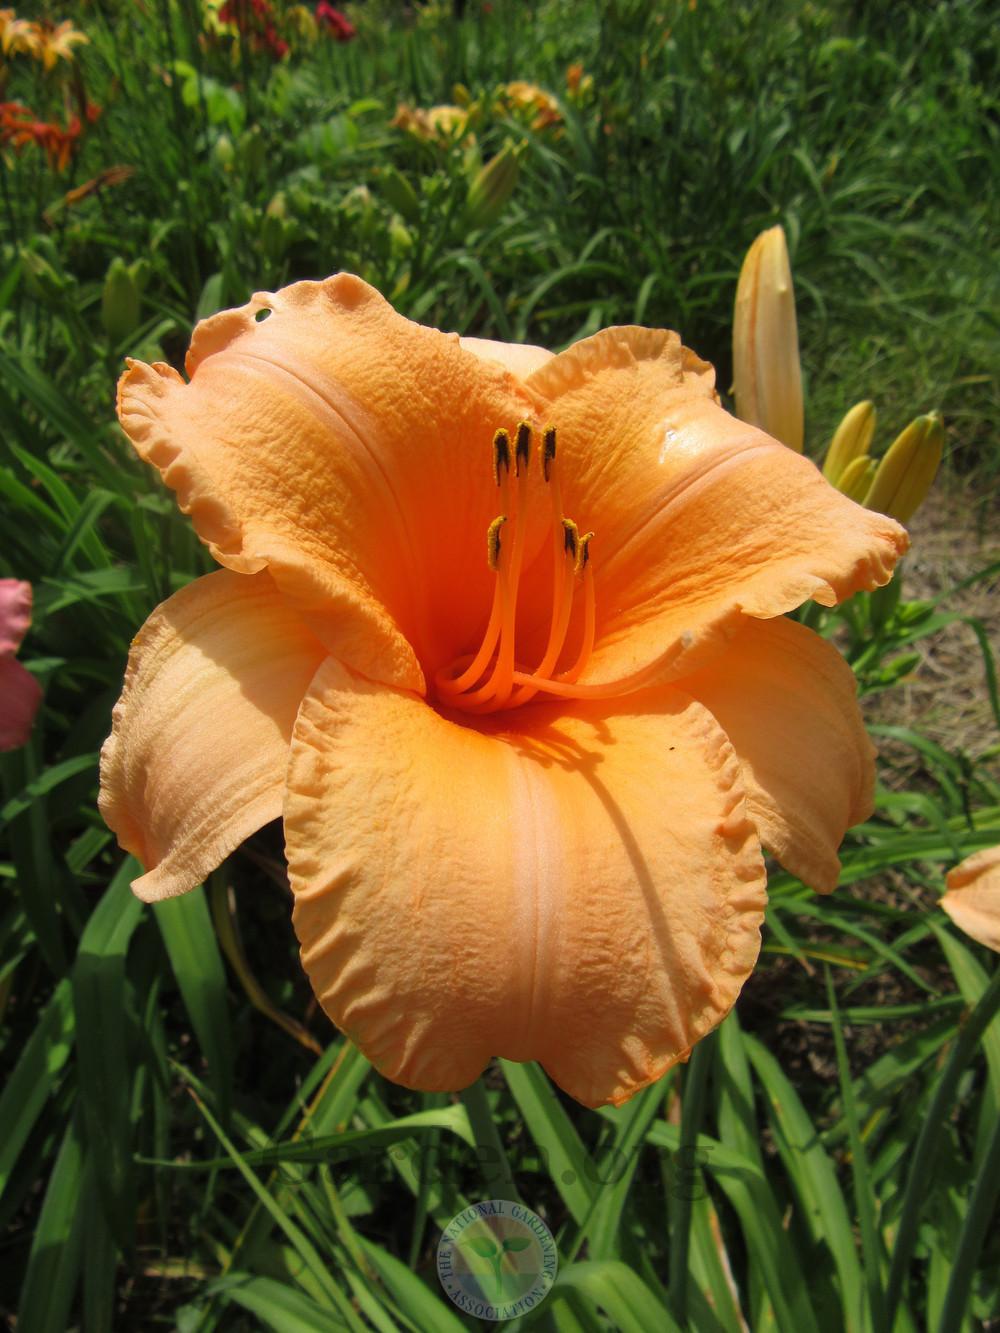 Photo of Daylily (Hemerocallis 'Flames of Fortune') uploaded by Frillylily